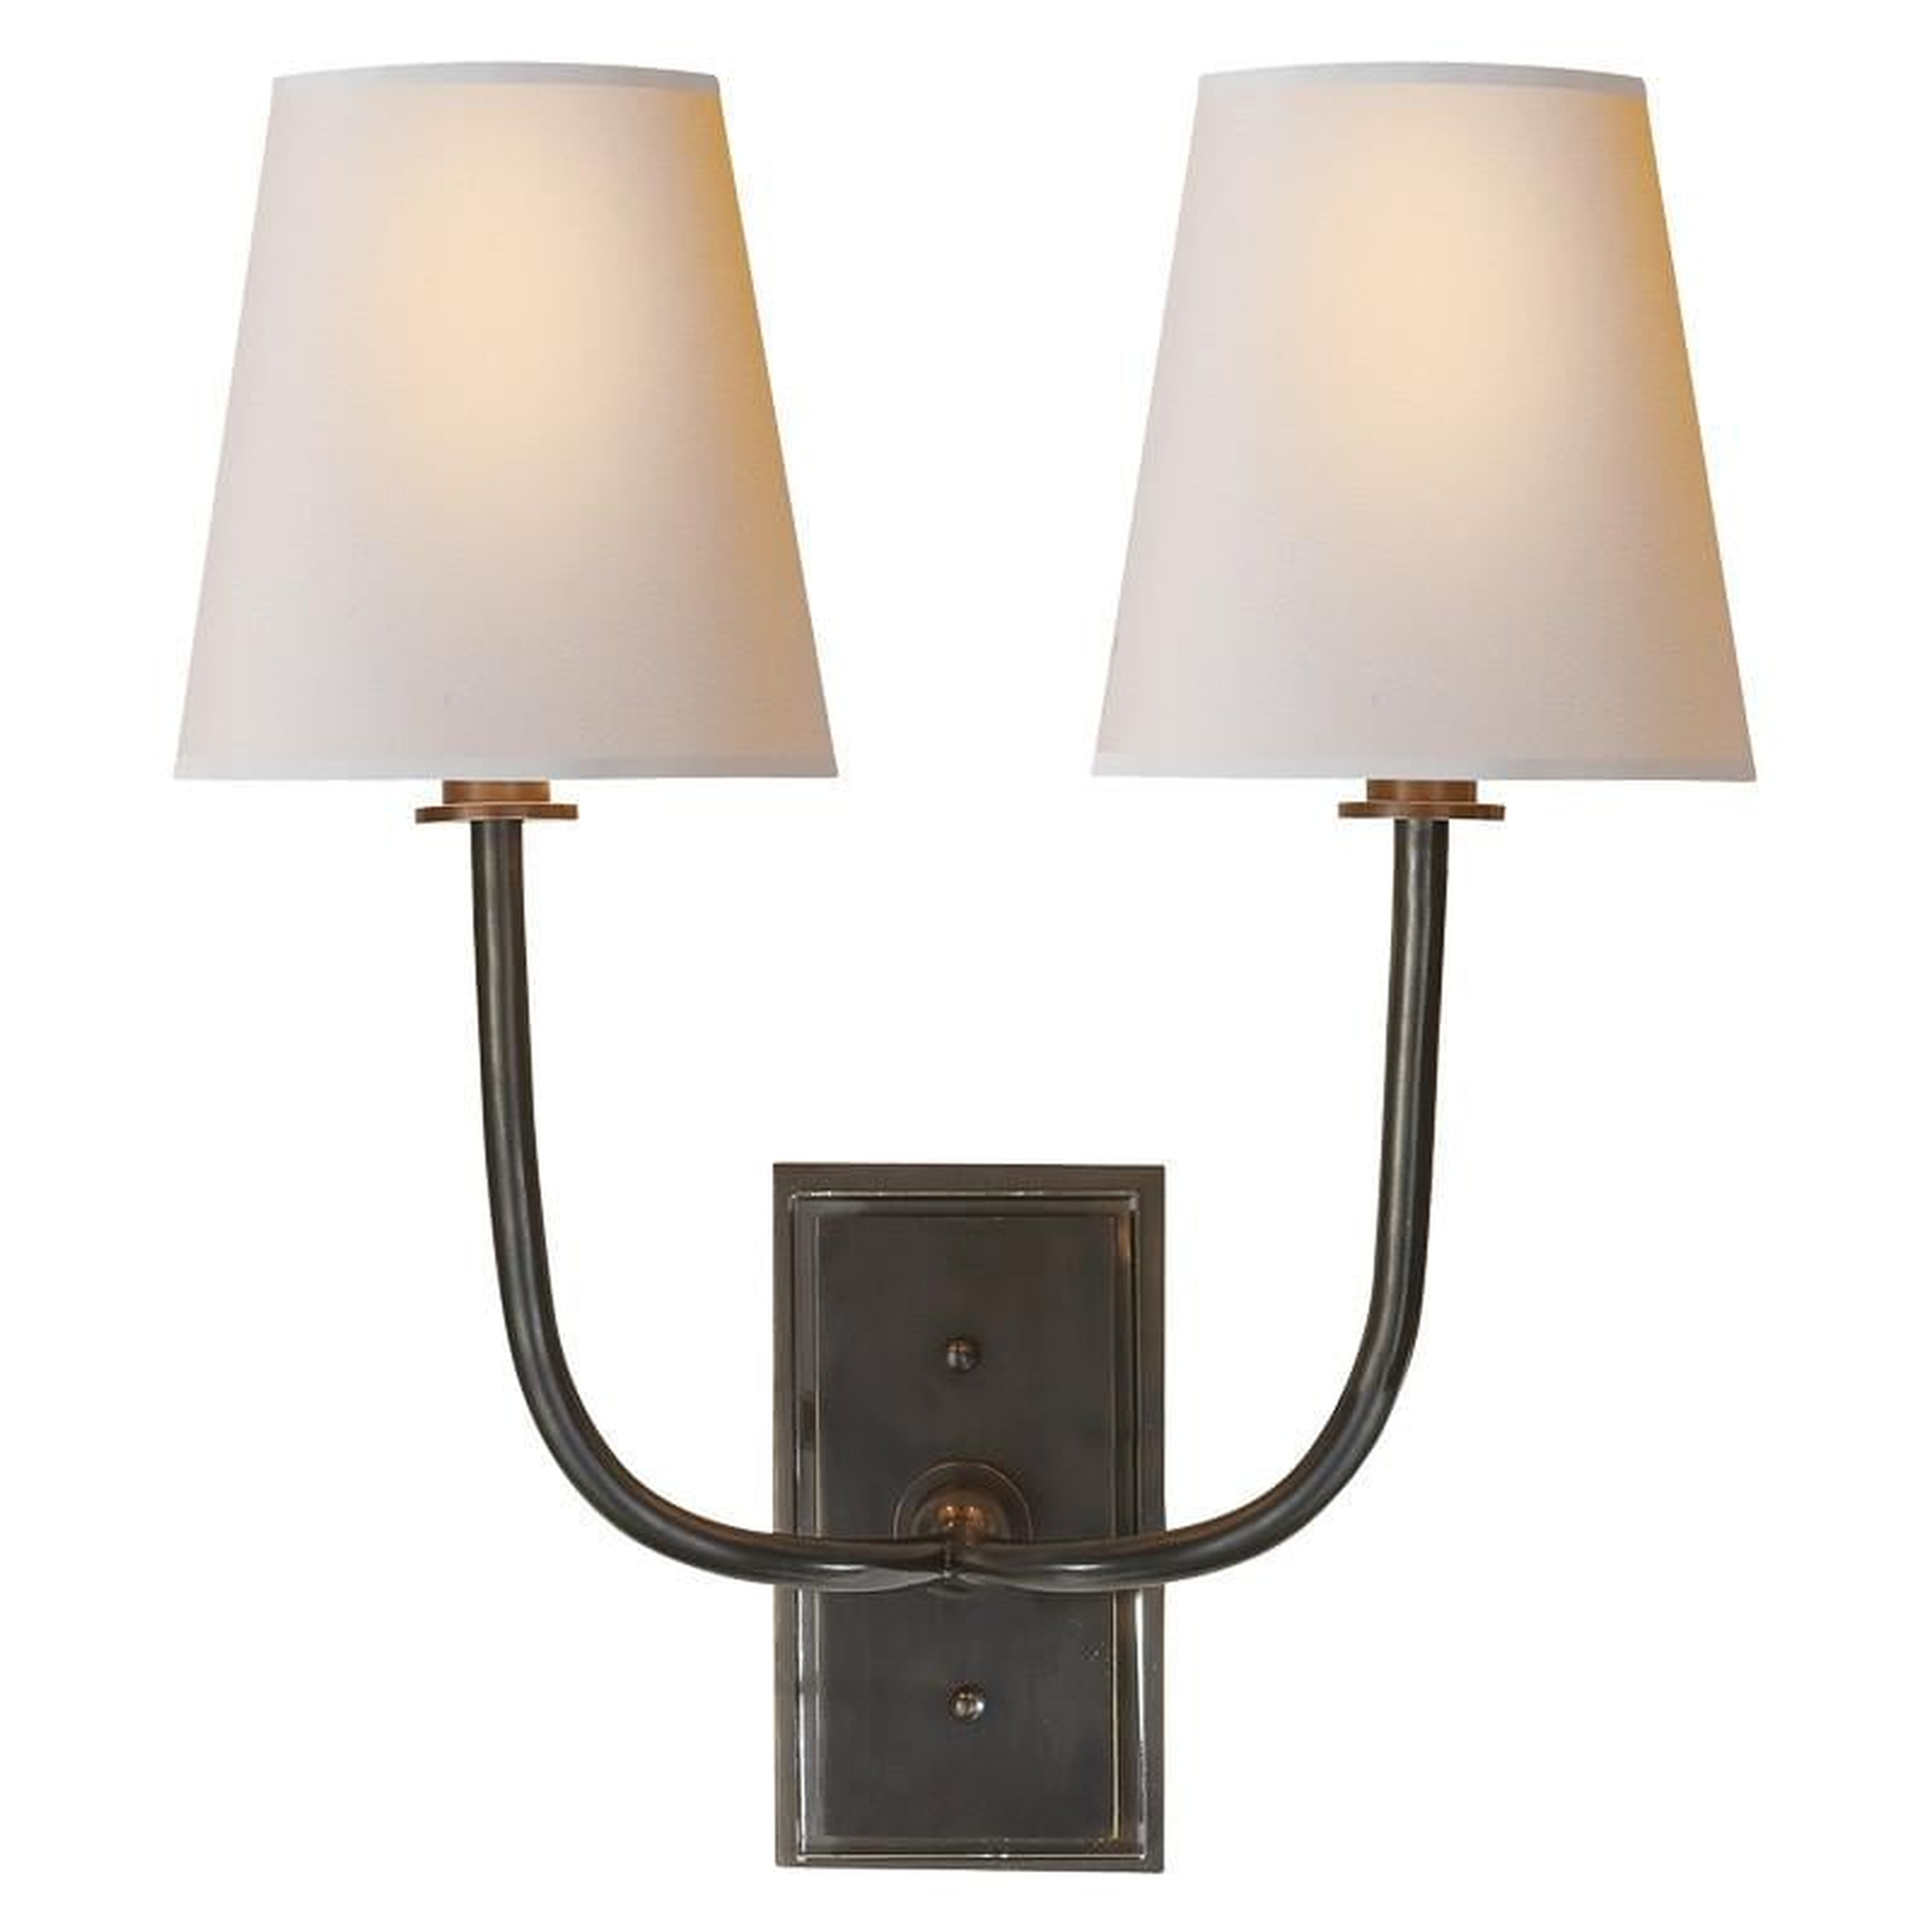 HULTON DOUBLE SCONCE - BRONZE - McGee & Co.